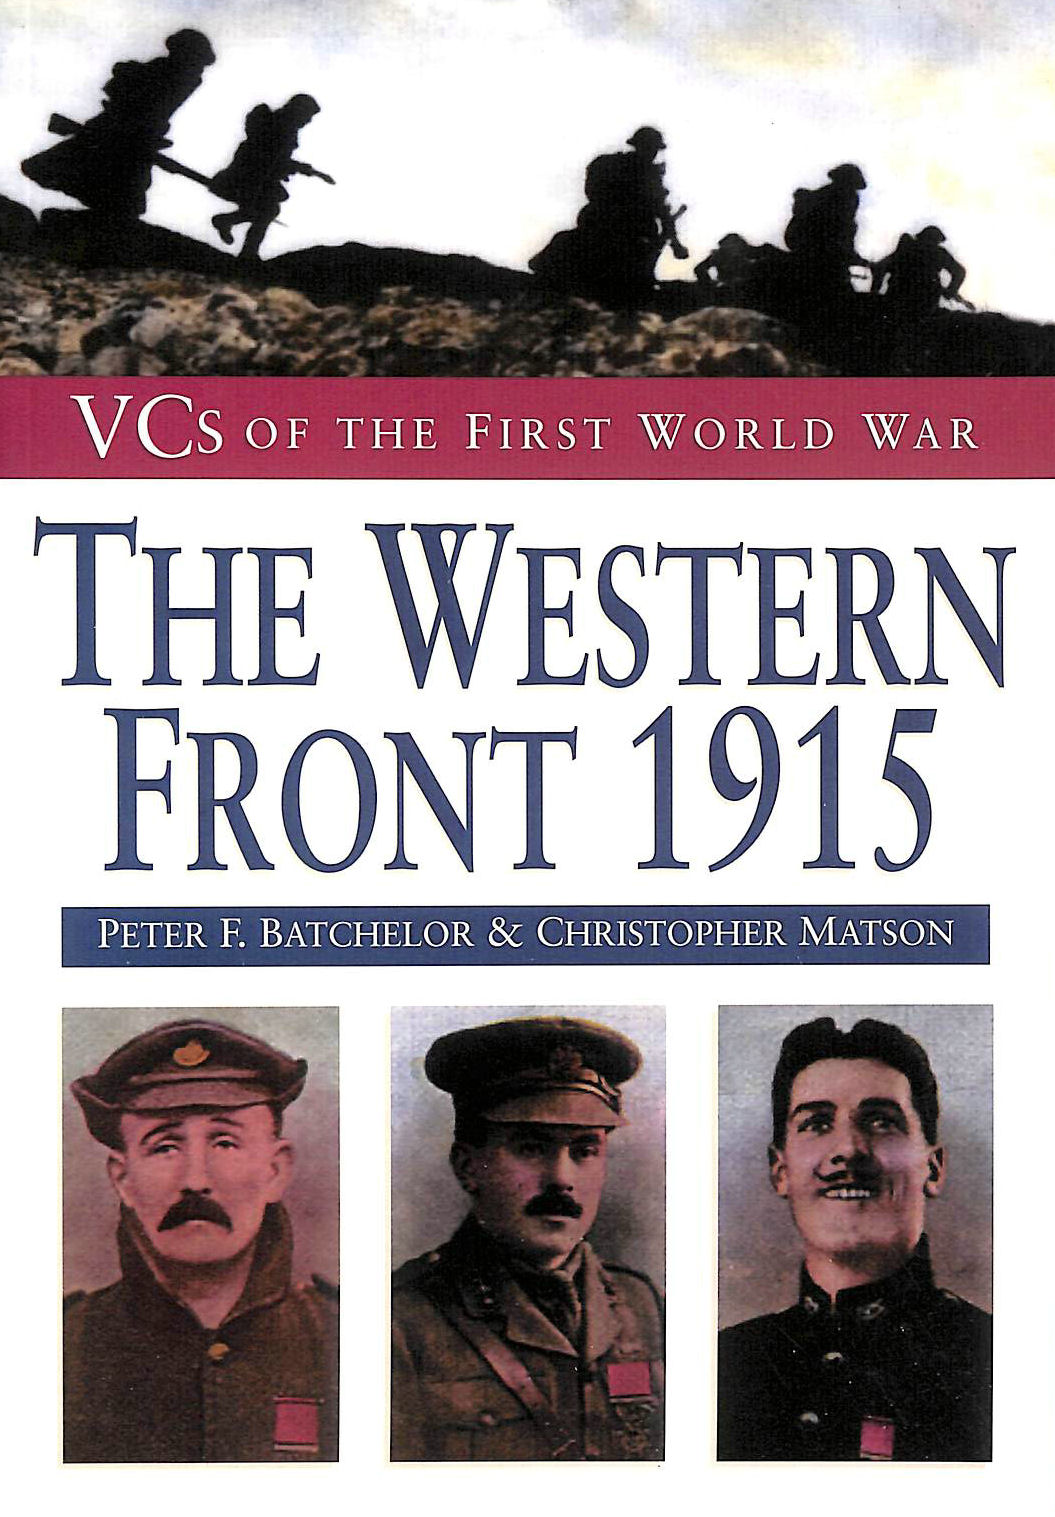 BATCHELOR, PETER F.; MATSON, CHRISTOPHER - The Western Front, 1915 (VCs of the First World War)